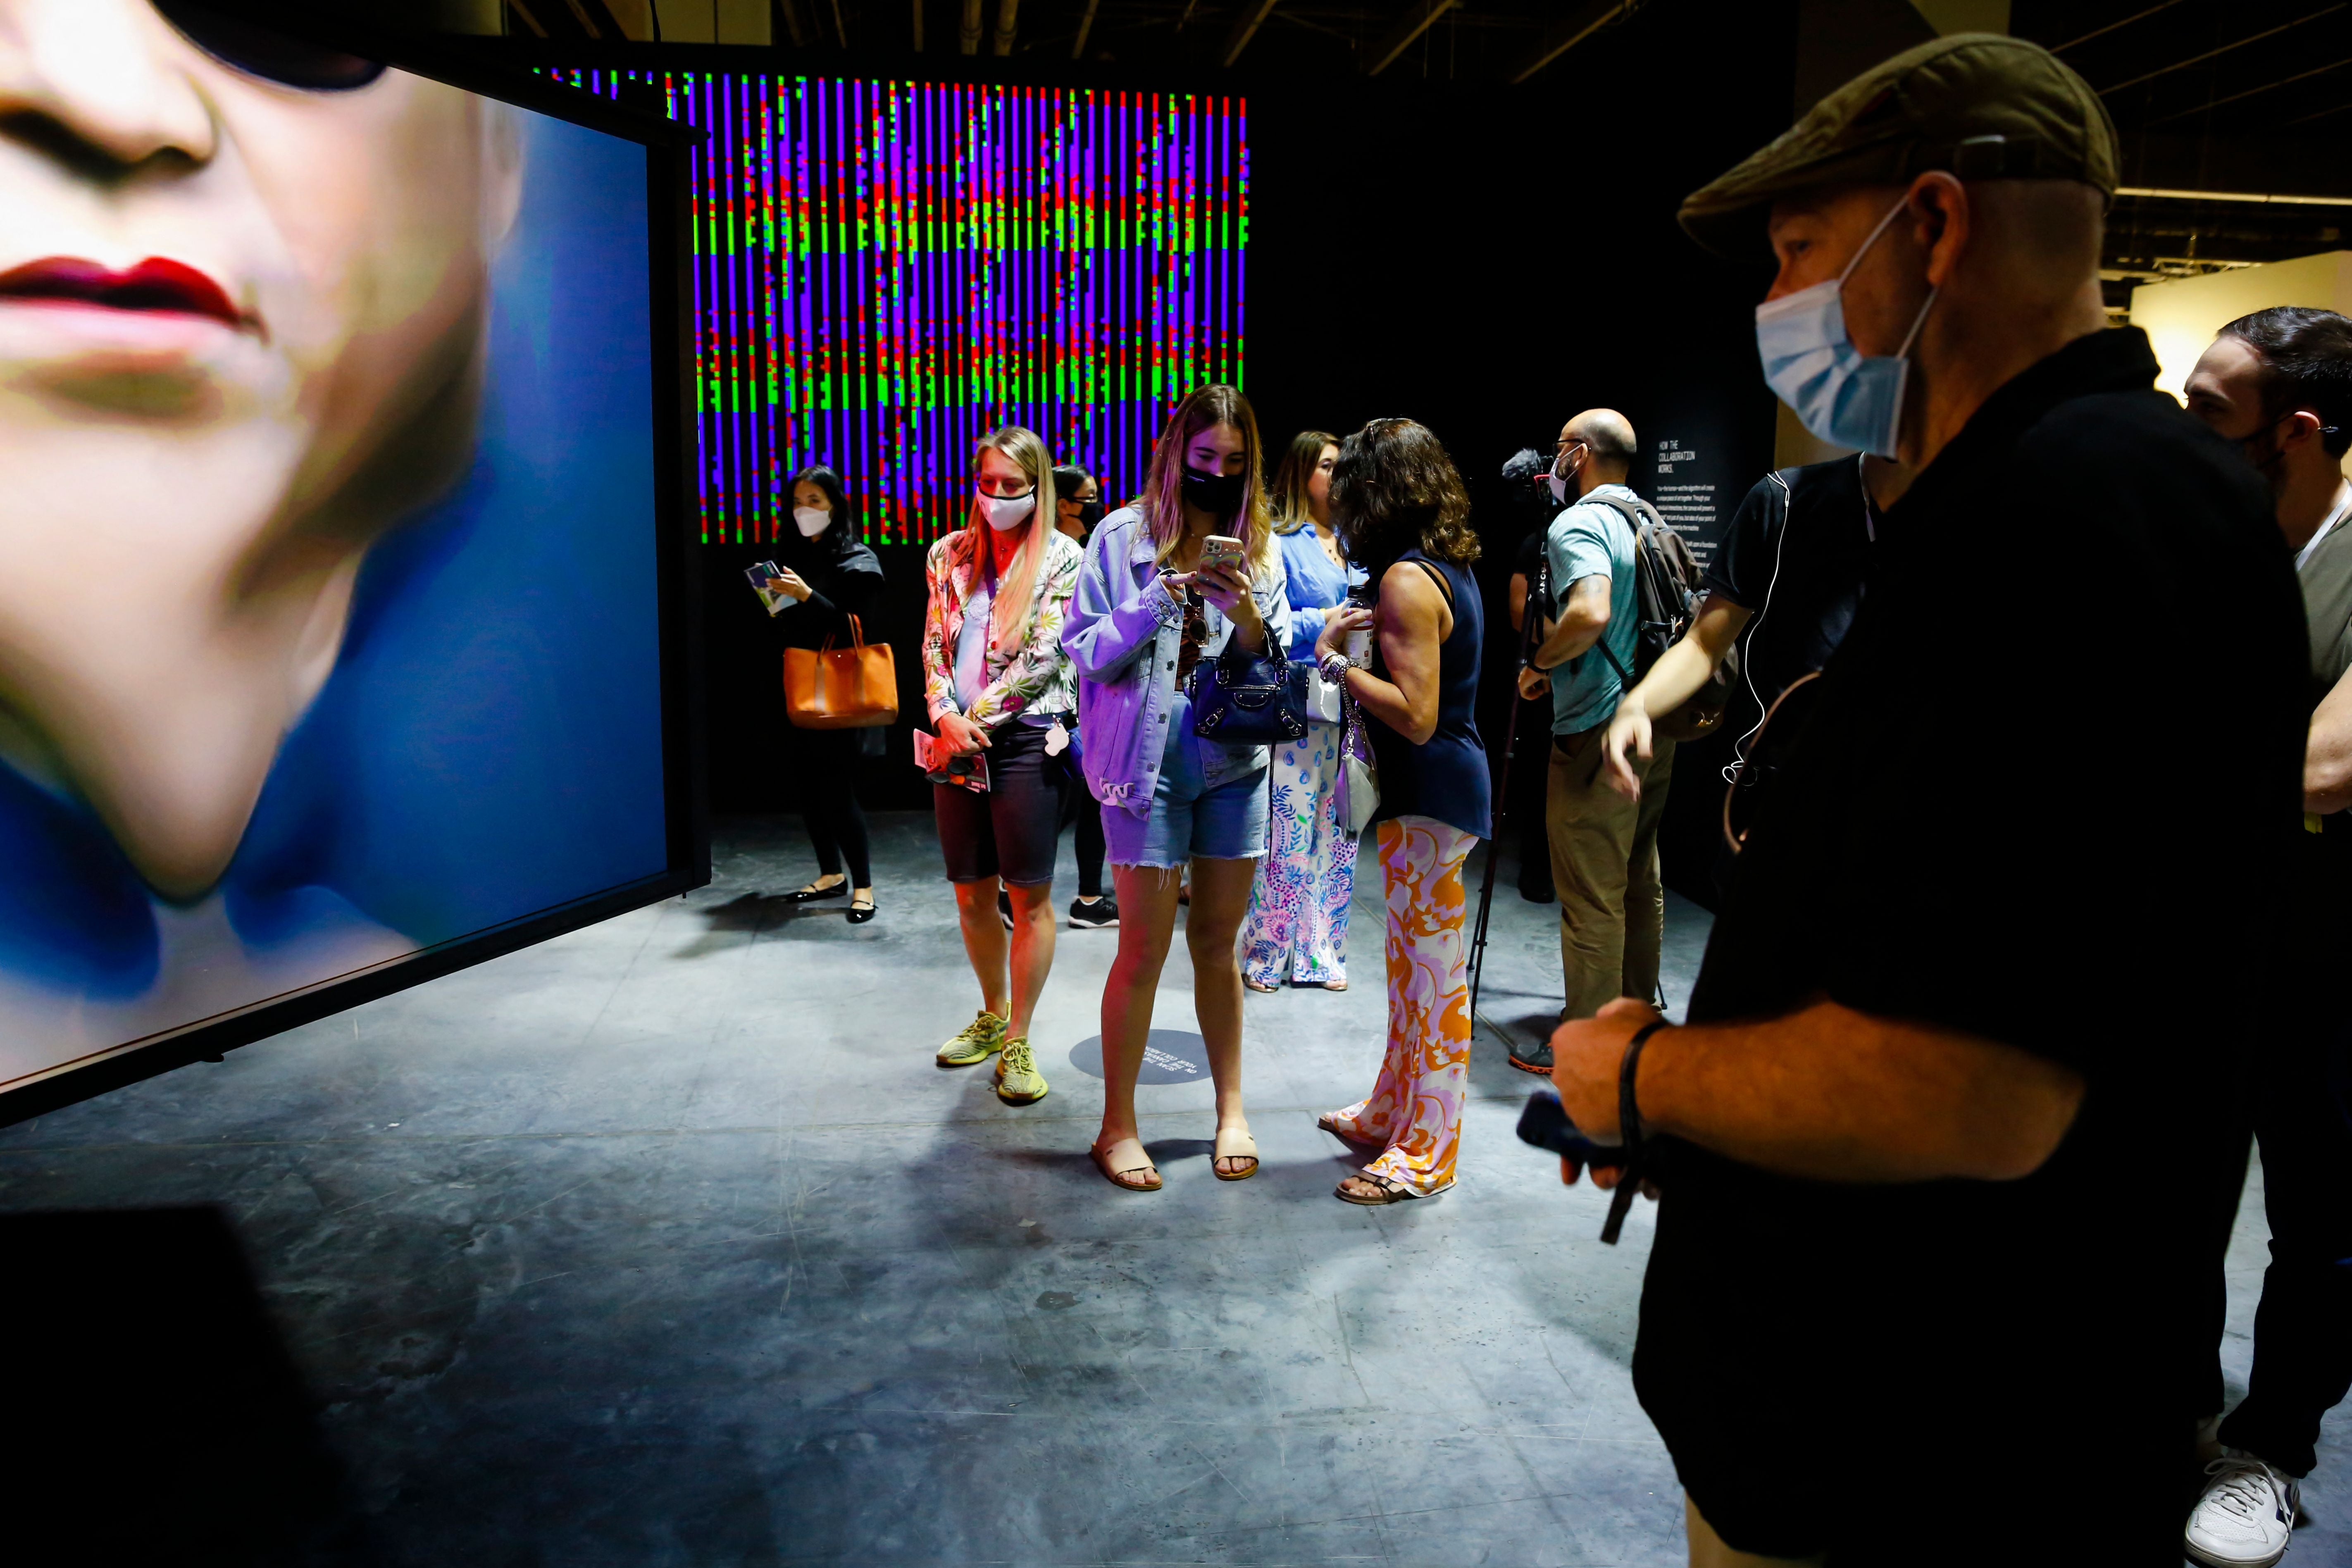 People interact with an NFT artwork by German artist Mario Klingeman during Art Basel 2021 at Miami Beach Convention Center in Miami Beach, Florida on December 2, 2021.